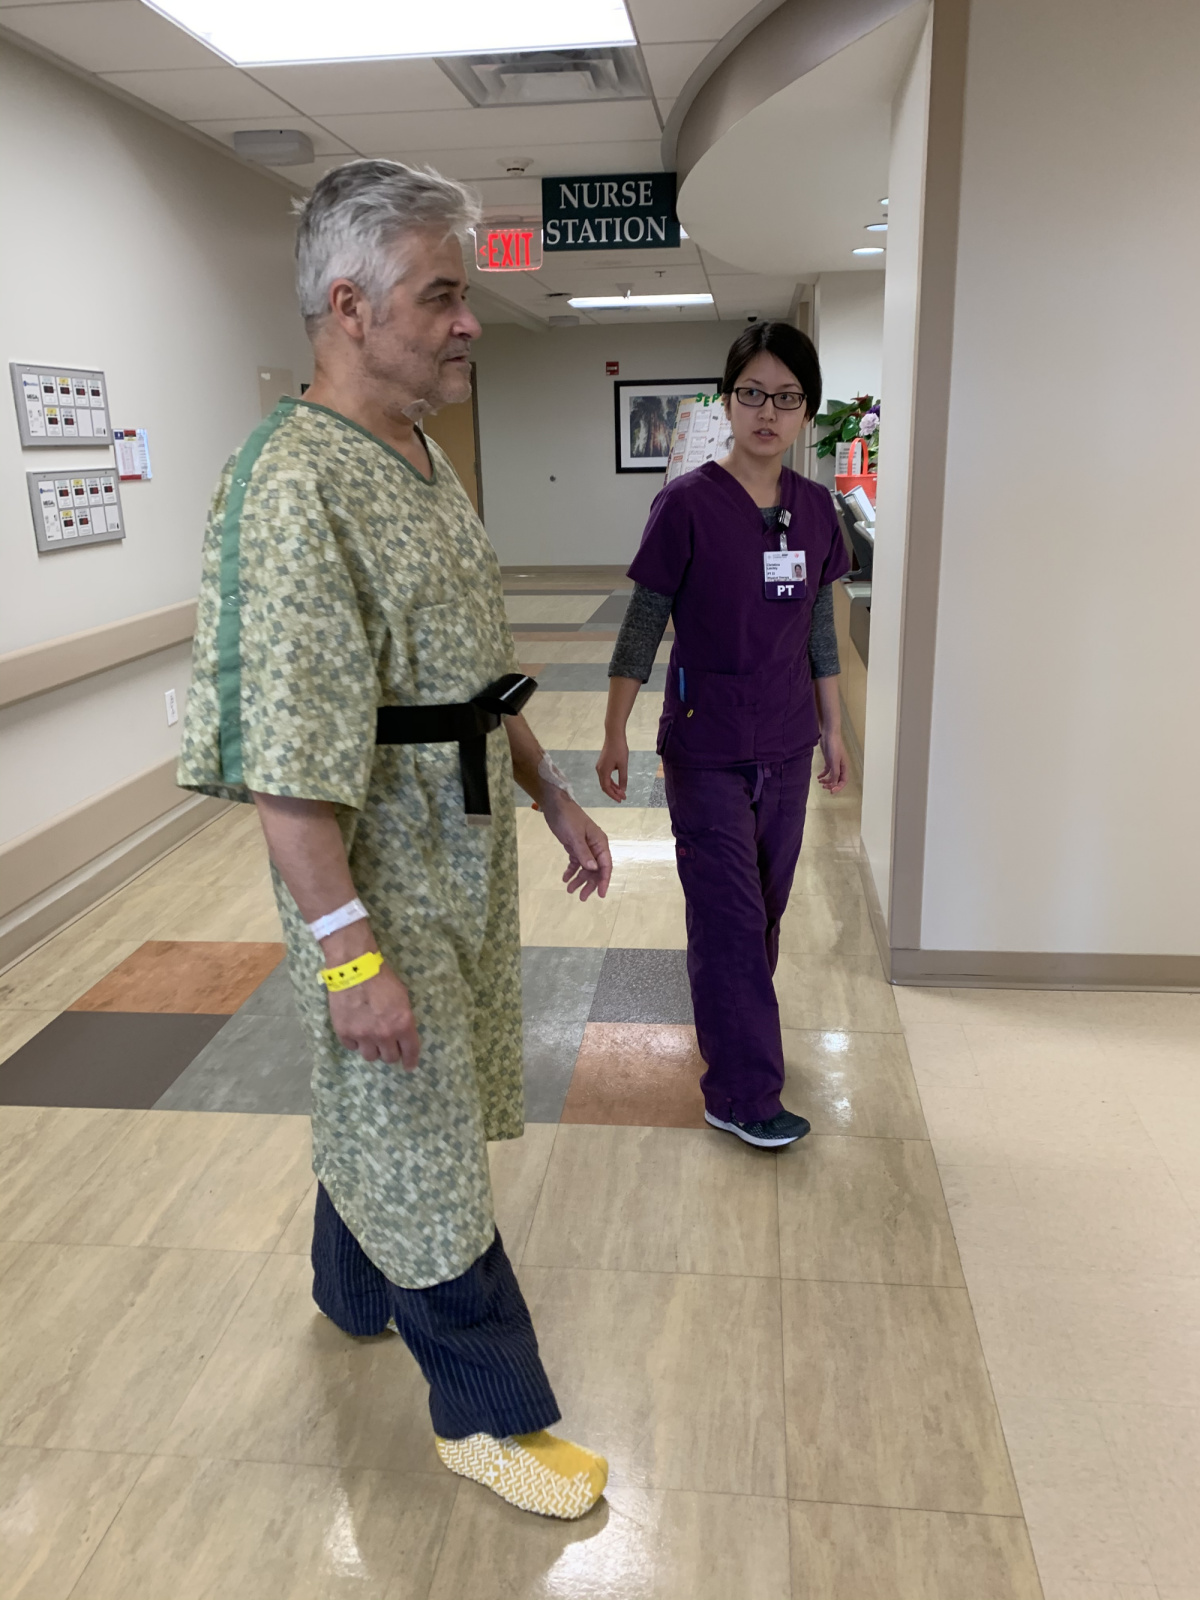 His physical therapist in the hospital, letting him figure out how to do left turns. He walks down the hall and doesn’t see the hallways to his left, walks past them. She says “life isn’t all right turns you know”. 